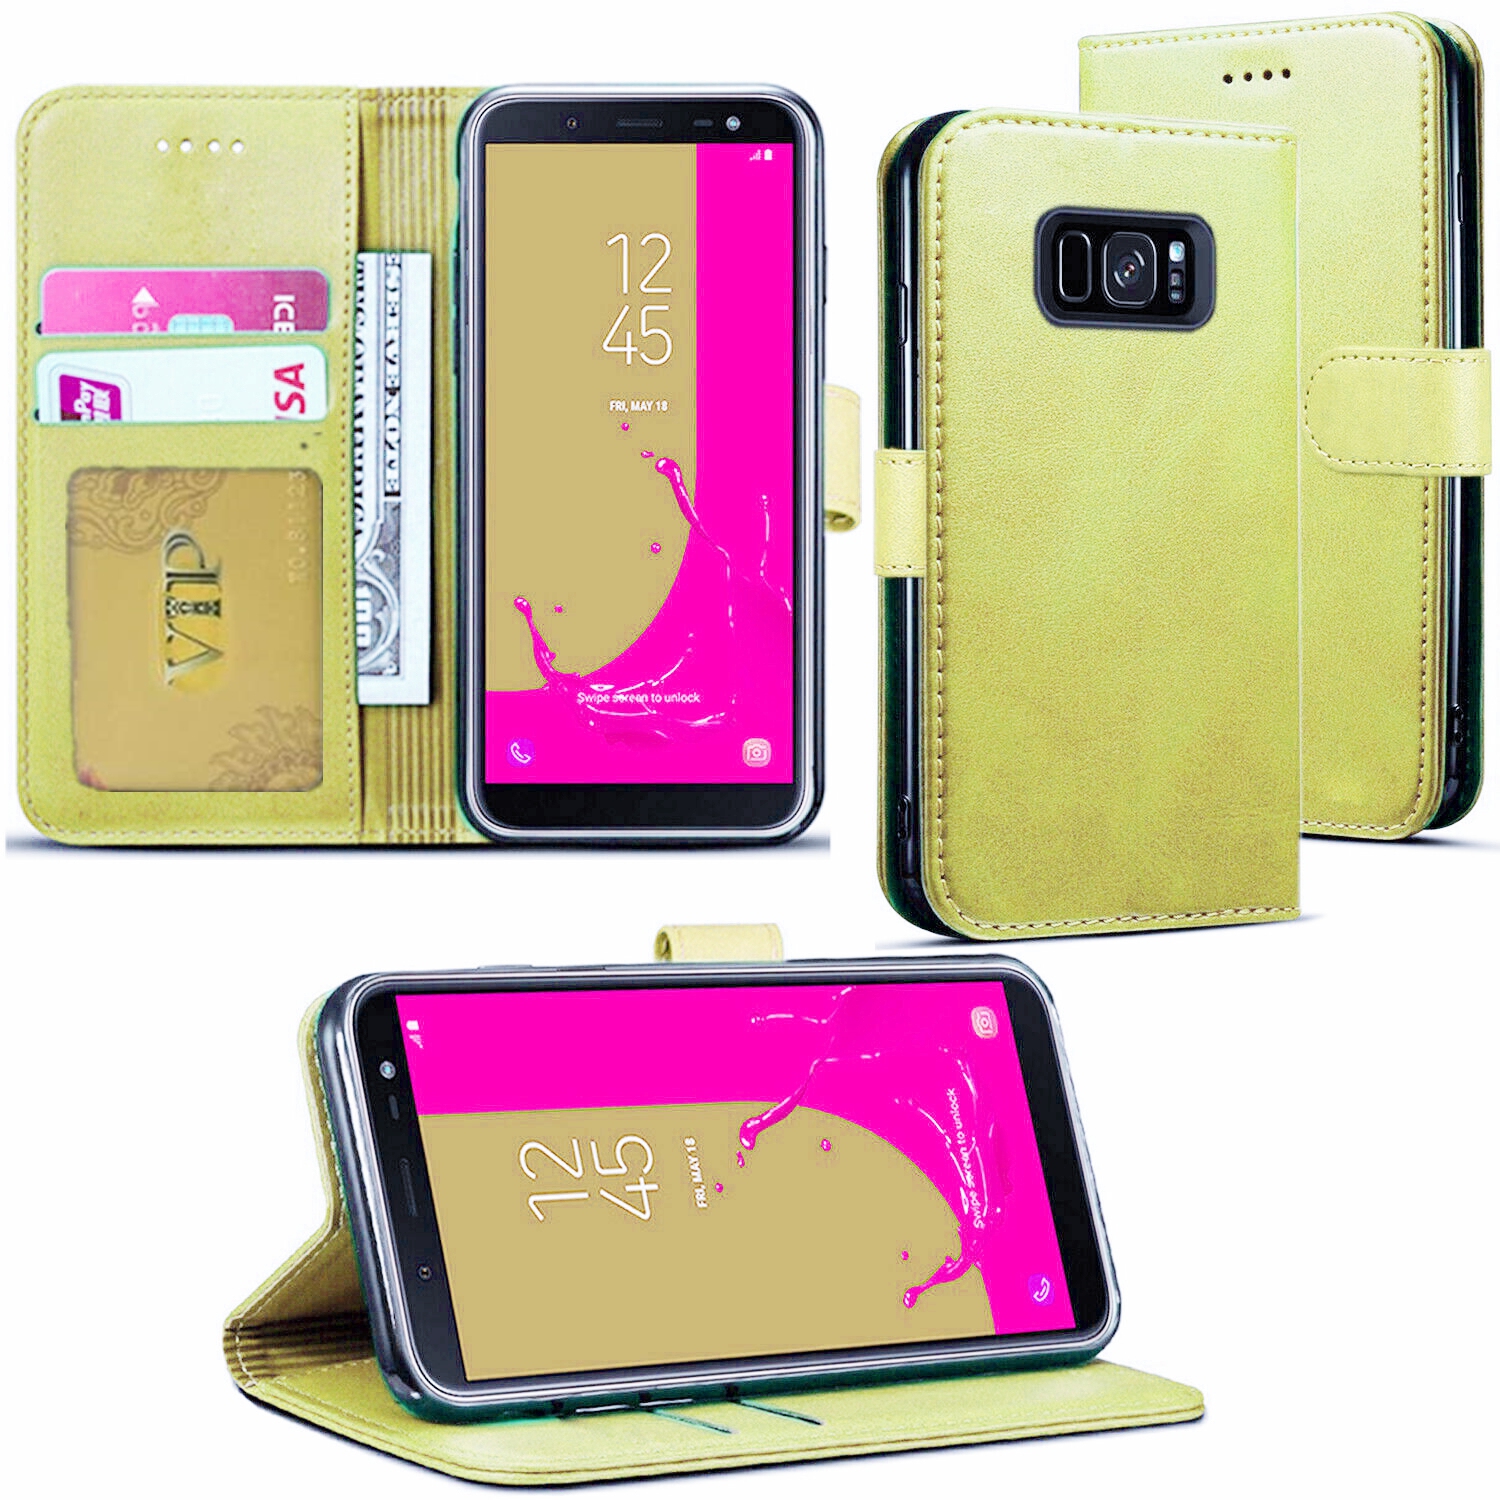 【CSmart】 Magnetic Card Slot Leather Folio Wallet Flip Case Cover for Samsung Galaxy S6 Edge Plus, Gold